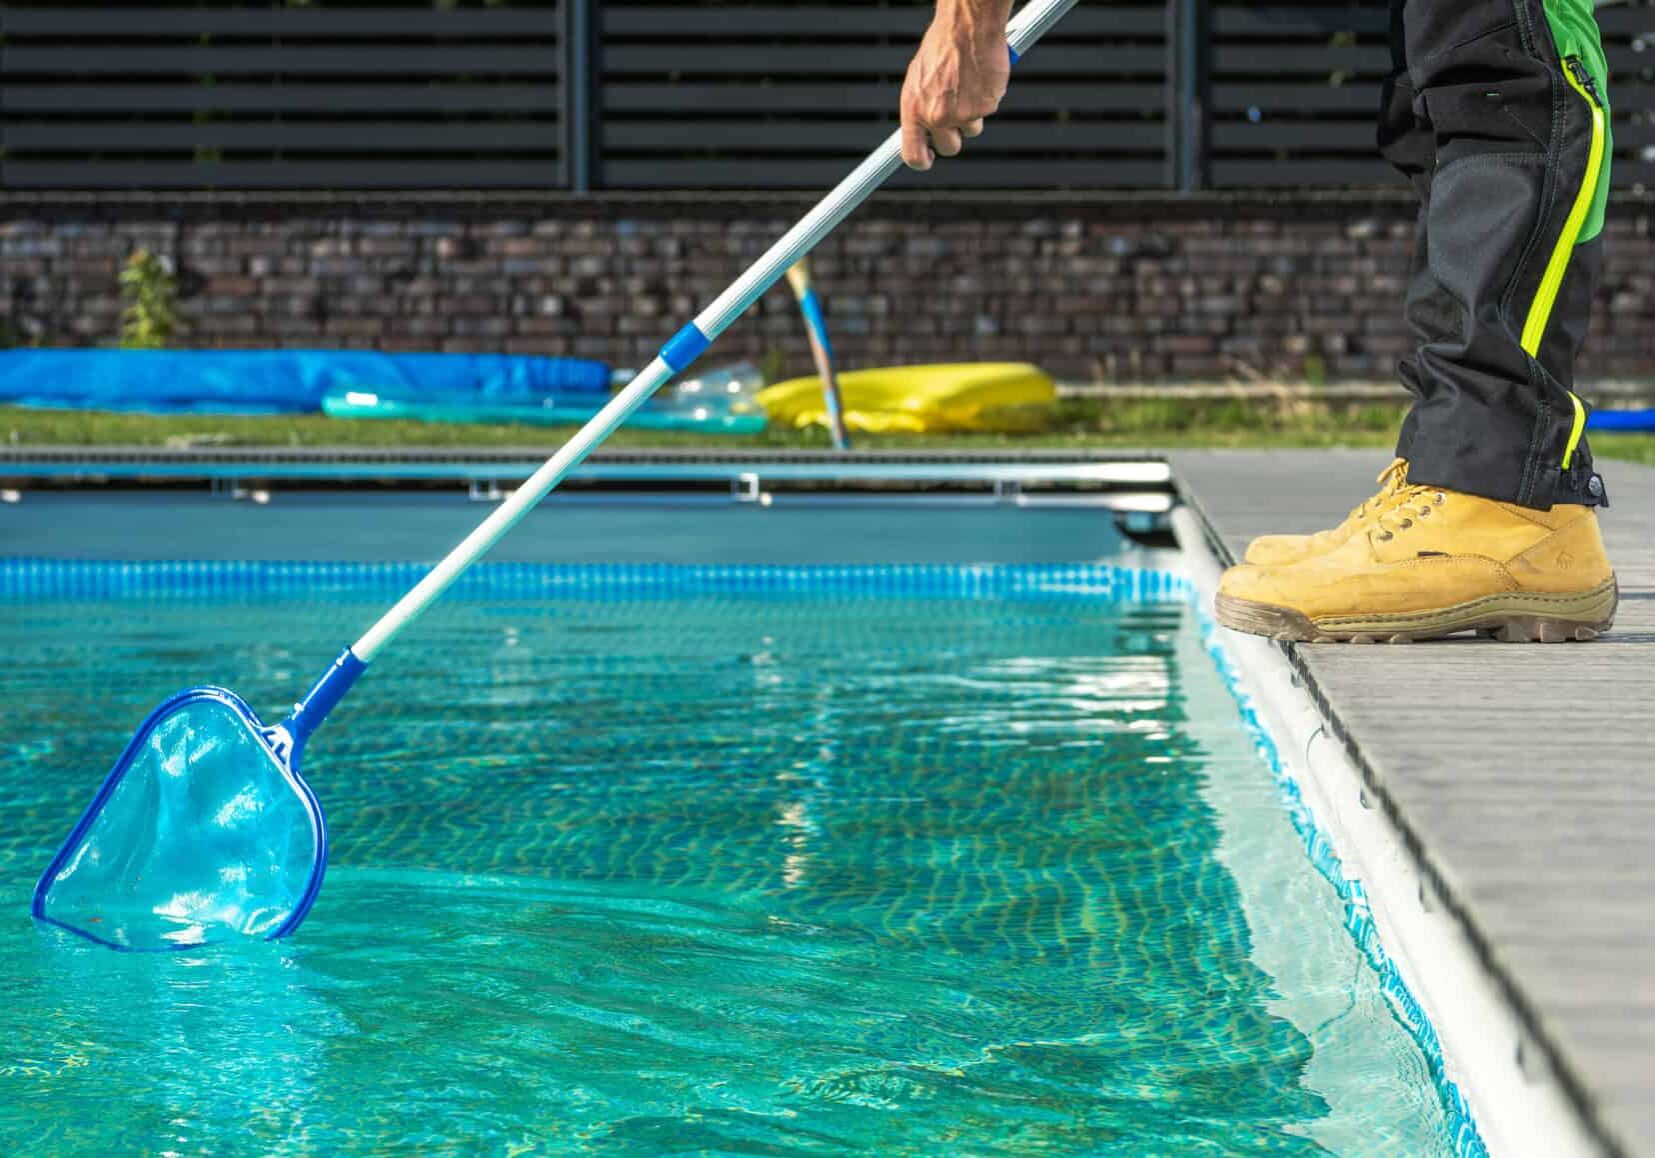 Caucasian Professional Pool Worker with a Pool Net Cleaning Residential Outdoor Swimming Pool